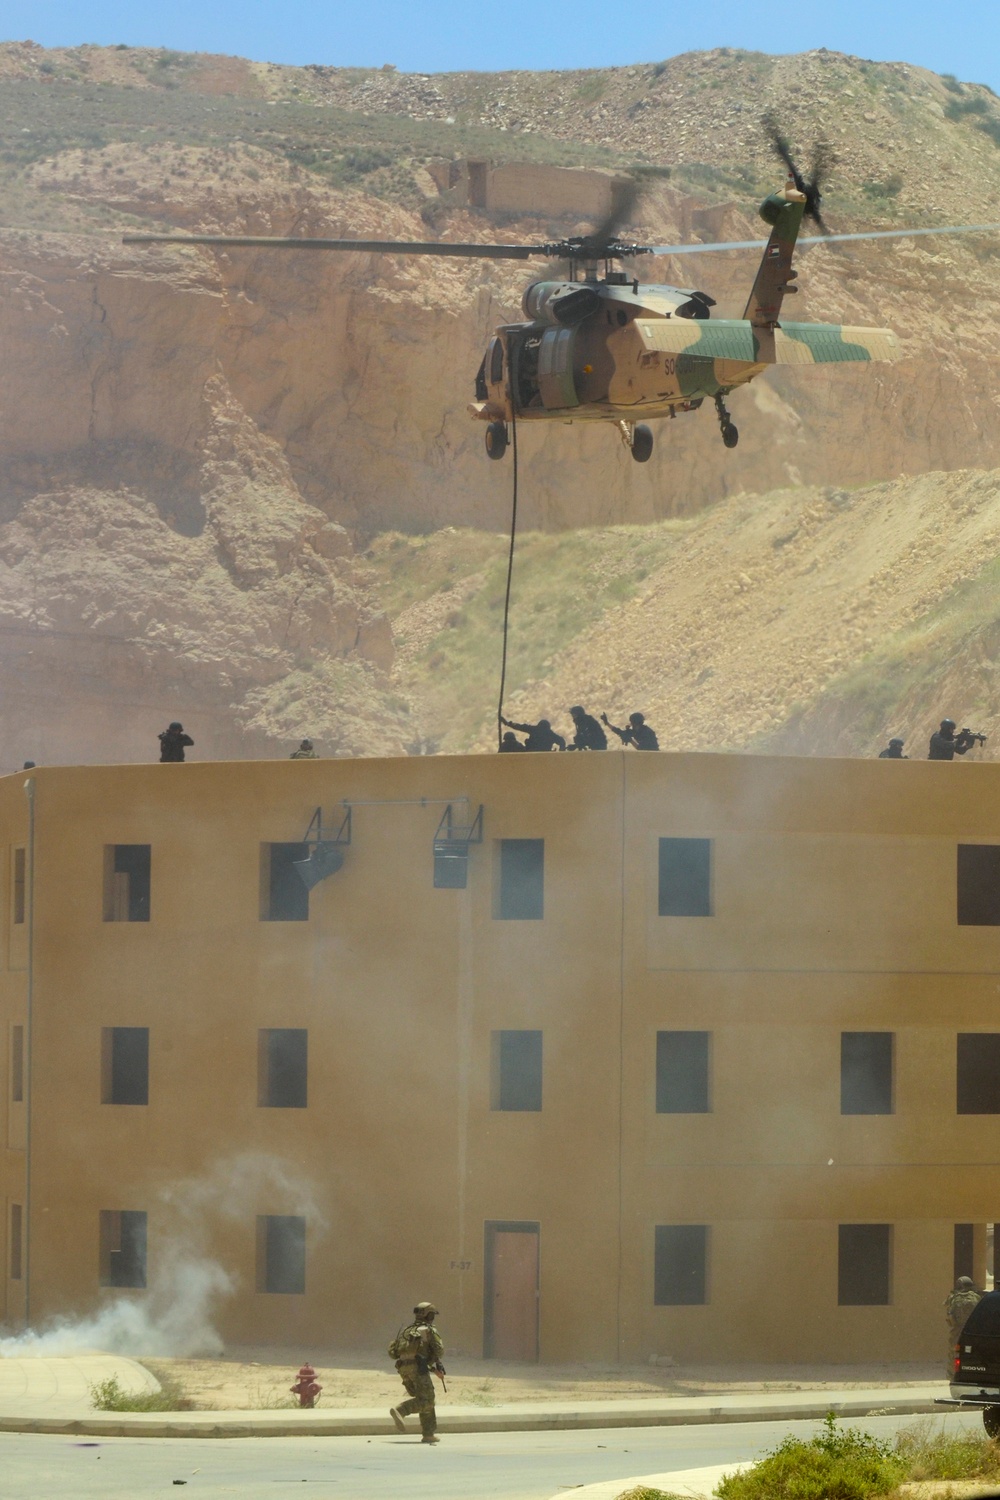 Coalition partners conduct capabilities demonstration